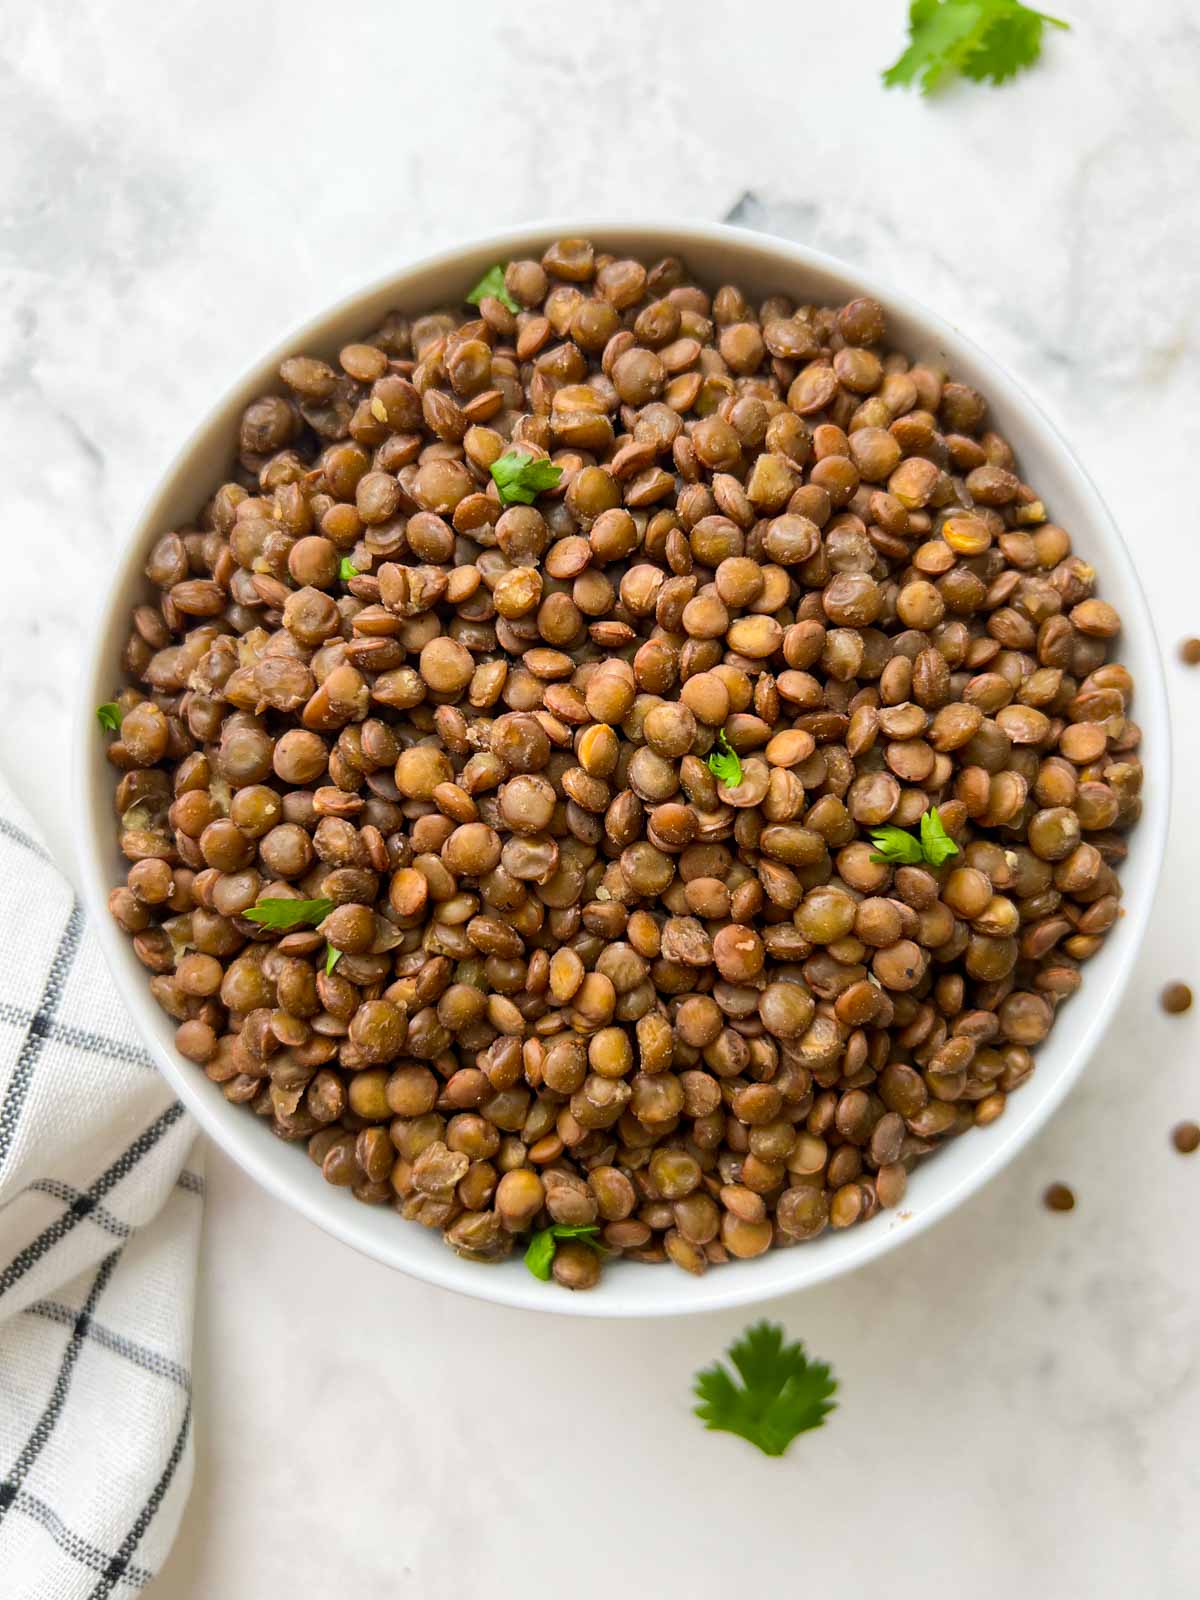 How To Store Cooked Lentils